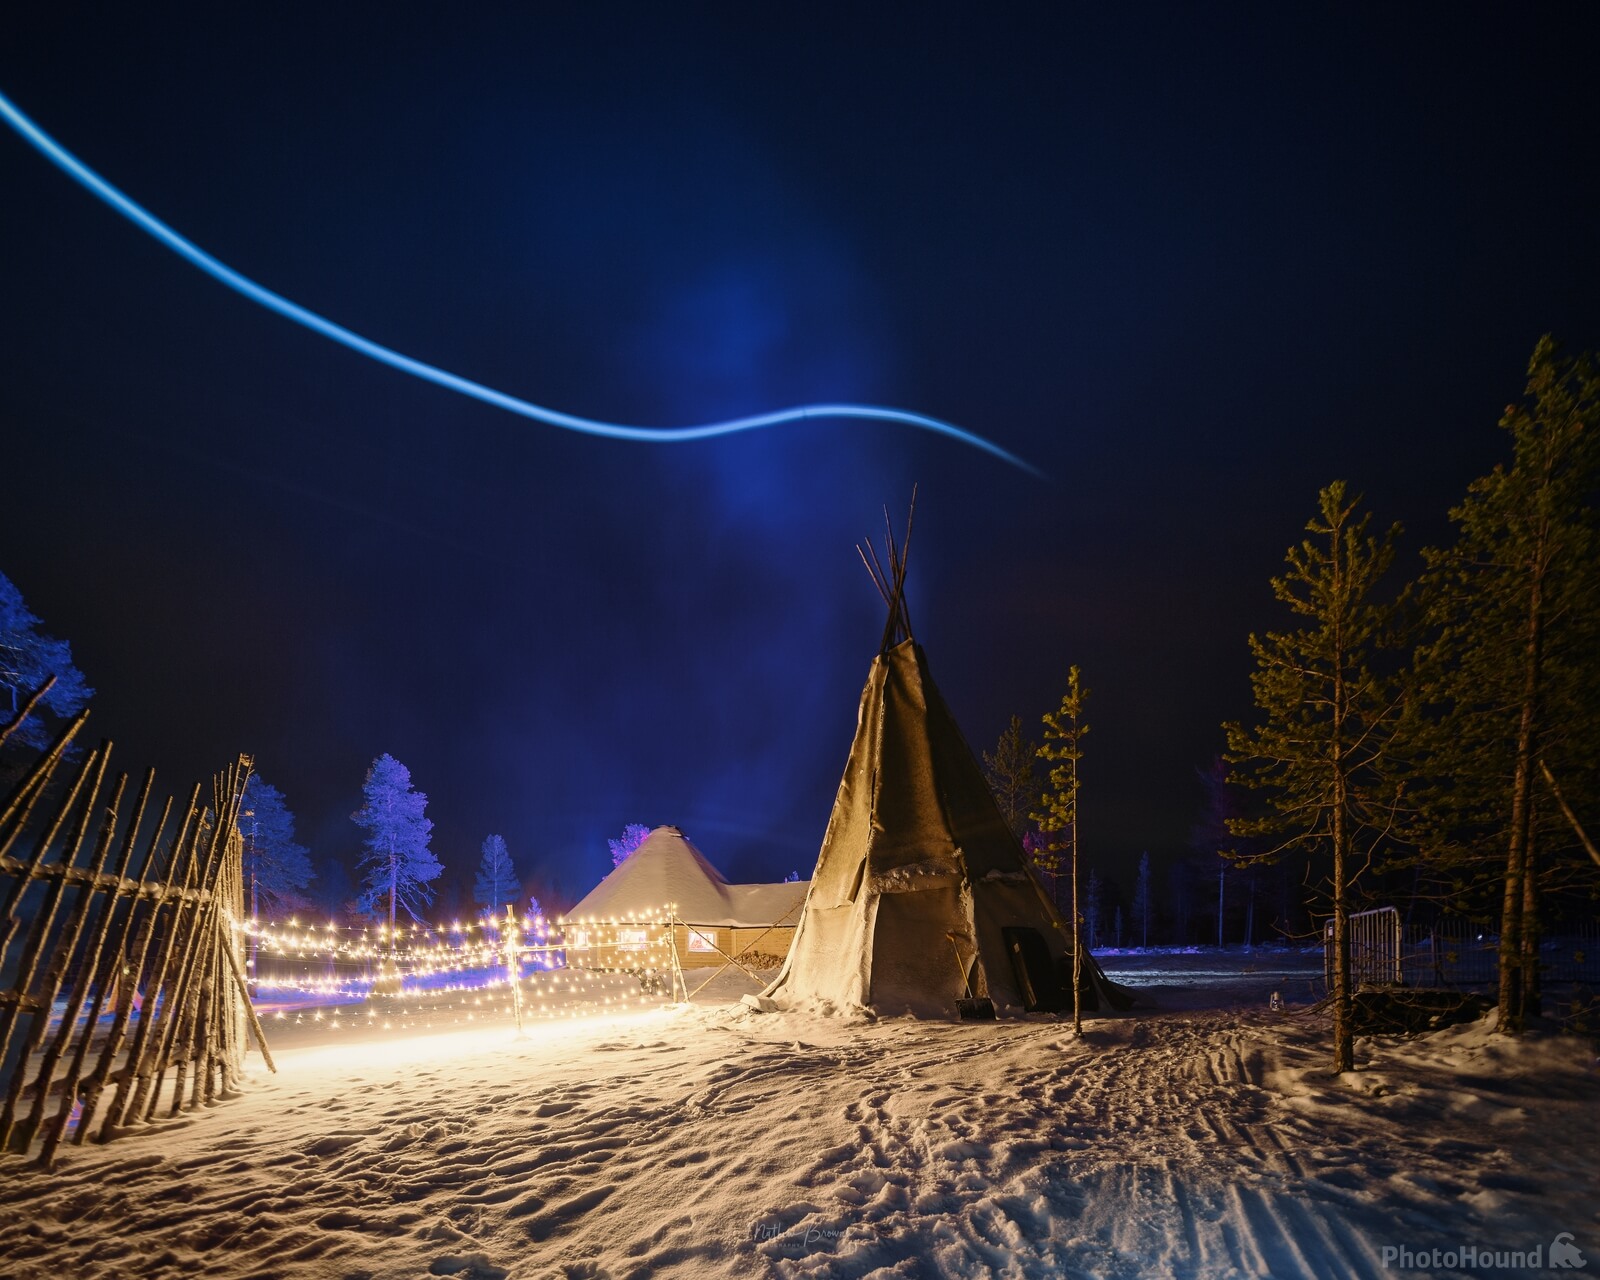 Image of Arctic Wilderness Center by Mathew Browne